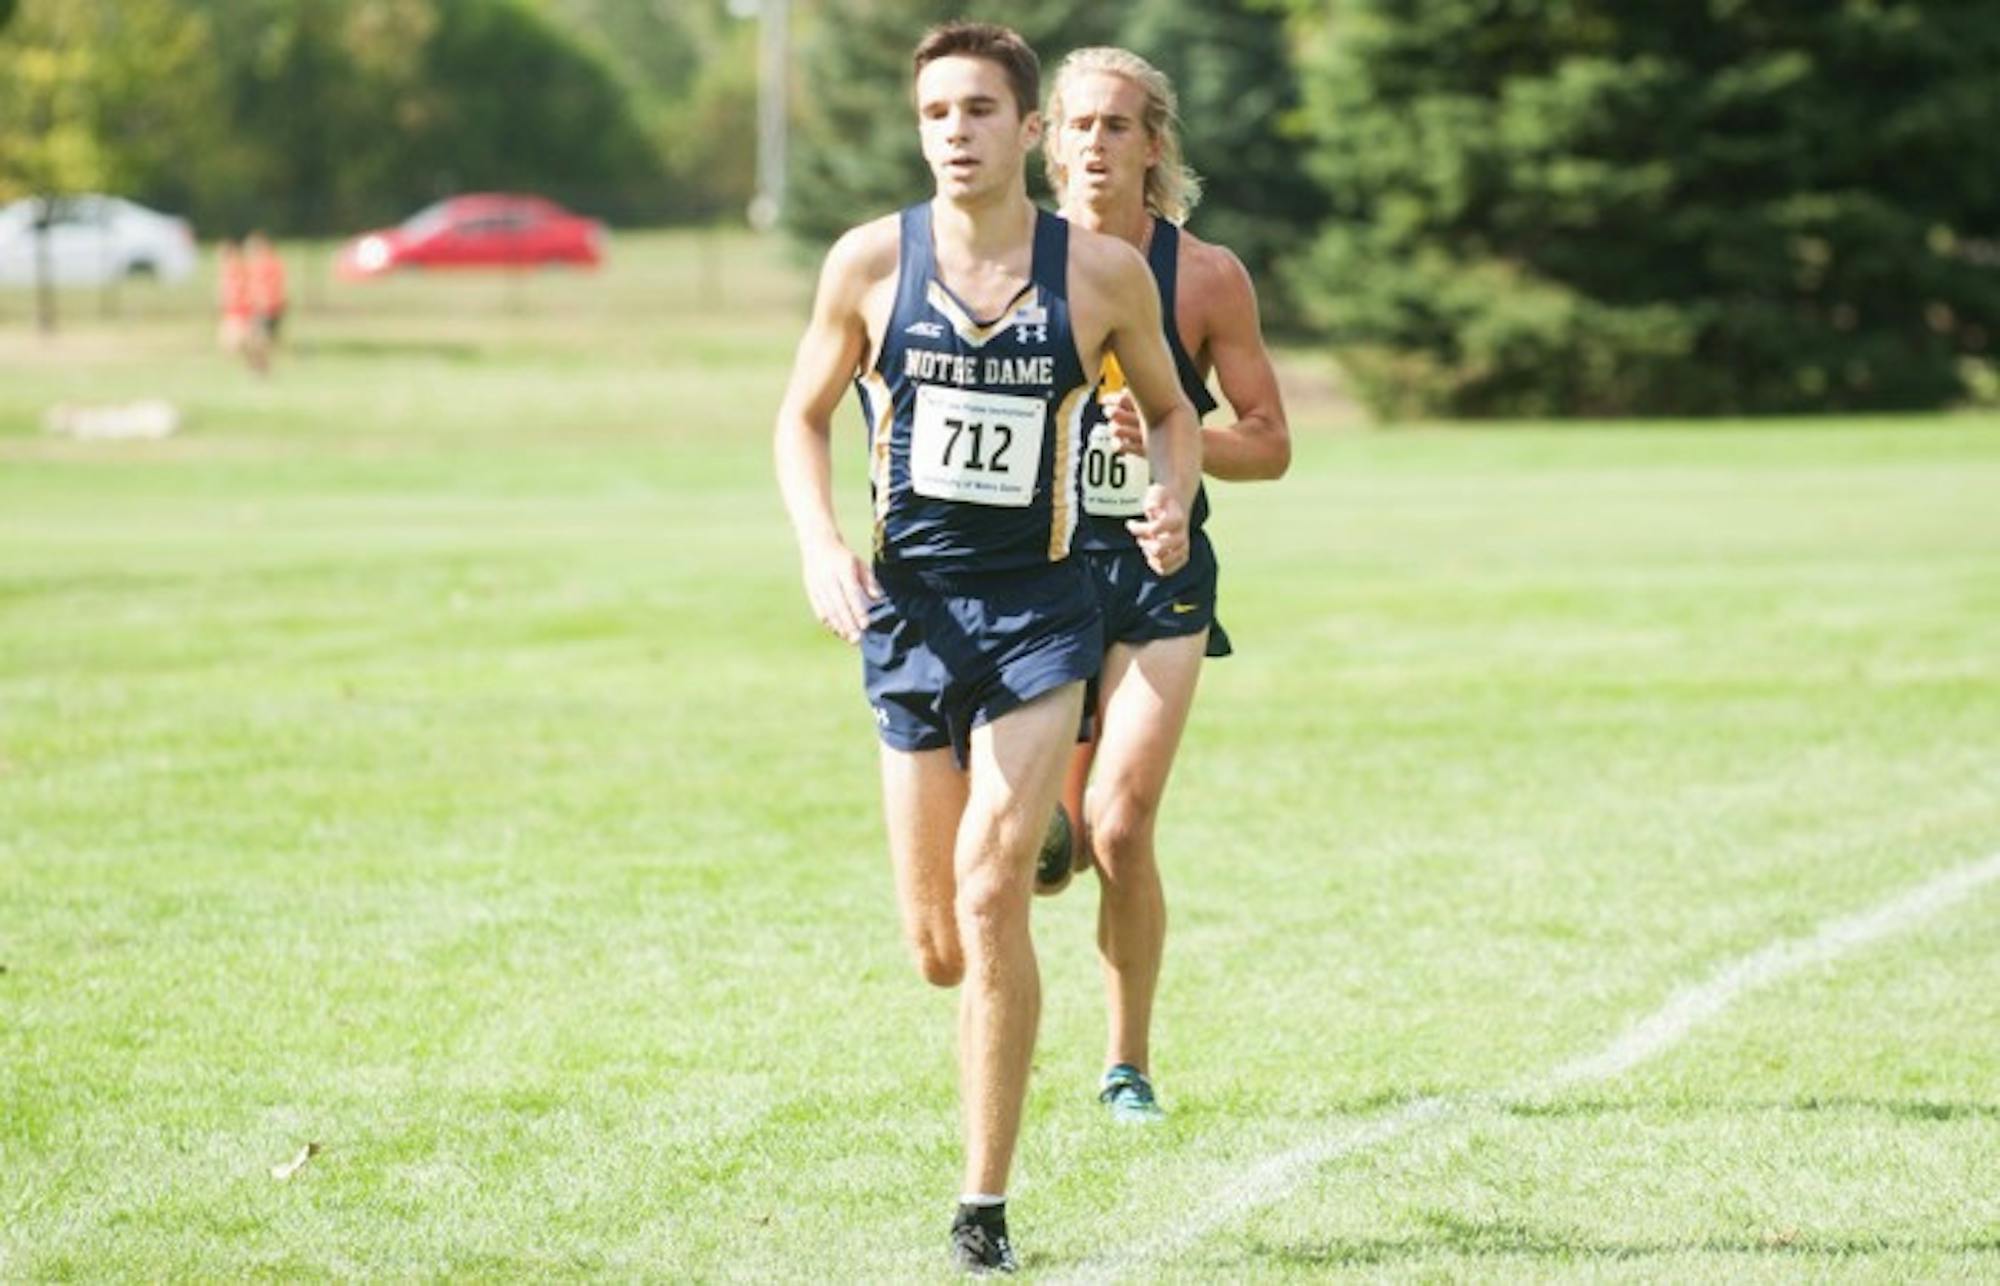 Irish freshman Brian Griffith competes during Notre Dame's Joe Piane Invitational on Sept. 29 at Burke Golf Course. Griffith finished first for Notre Dame and tenth overall in a time of 25:50.3.